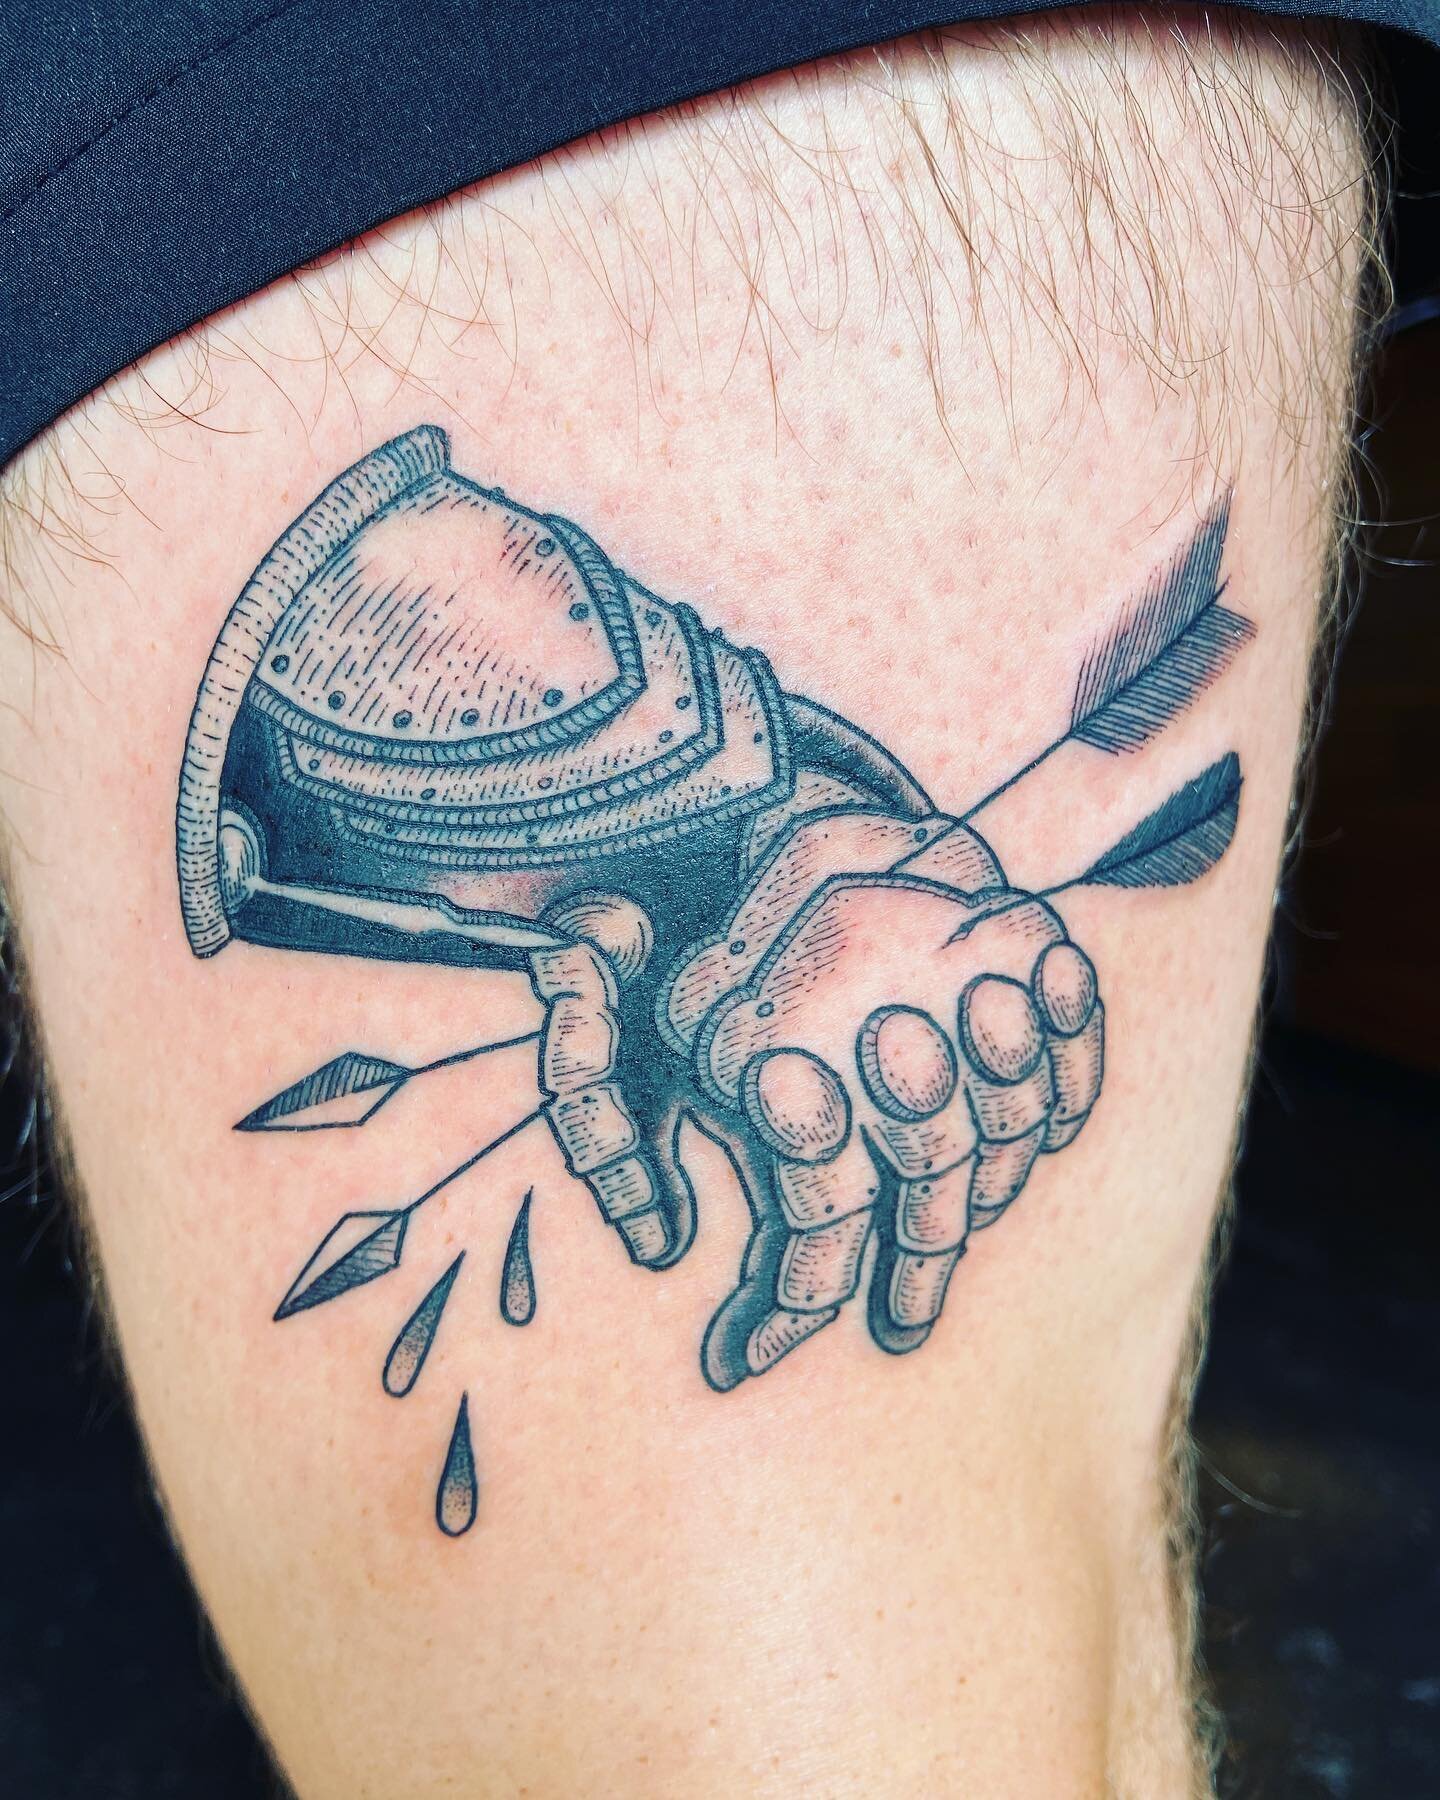 Super fun freehand medieval gauntlet on austin! Thanks for a great piece brother!
There are still a few select spots available for October! As always, DM TO BOOK!
@serotattoocollective